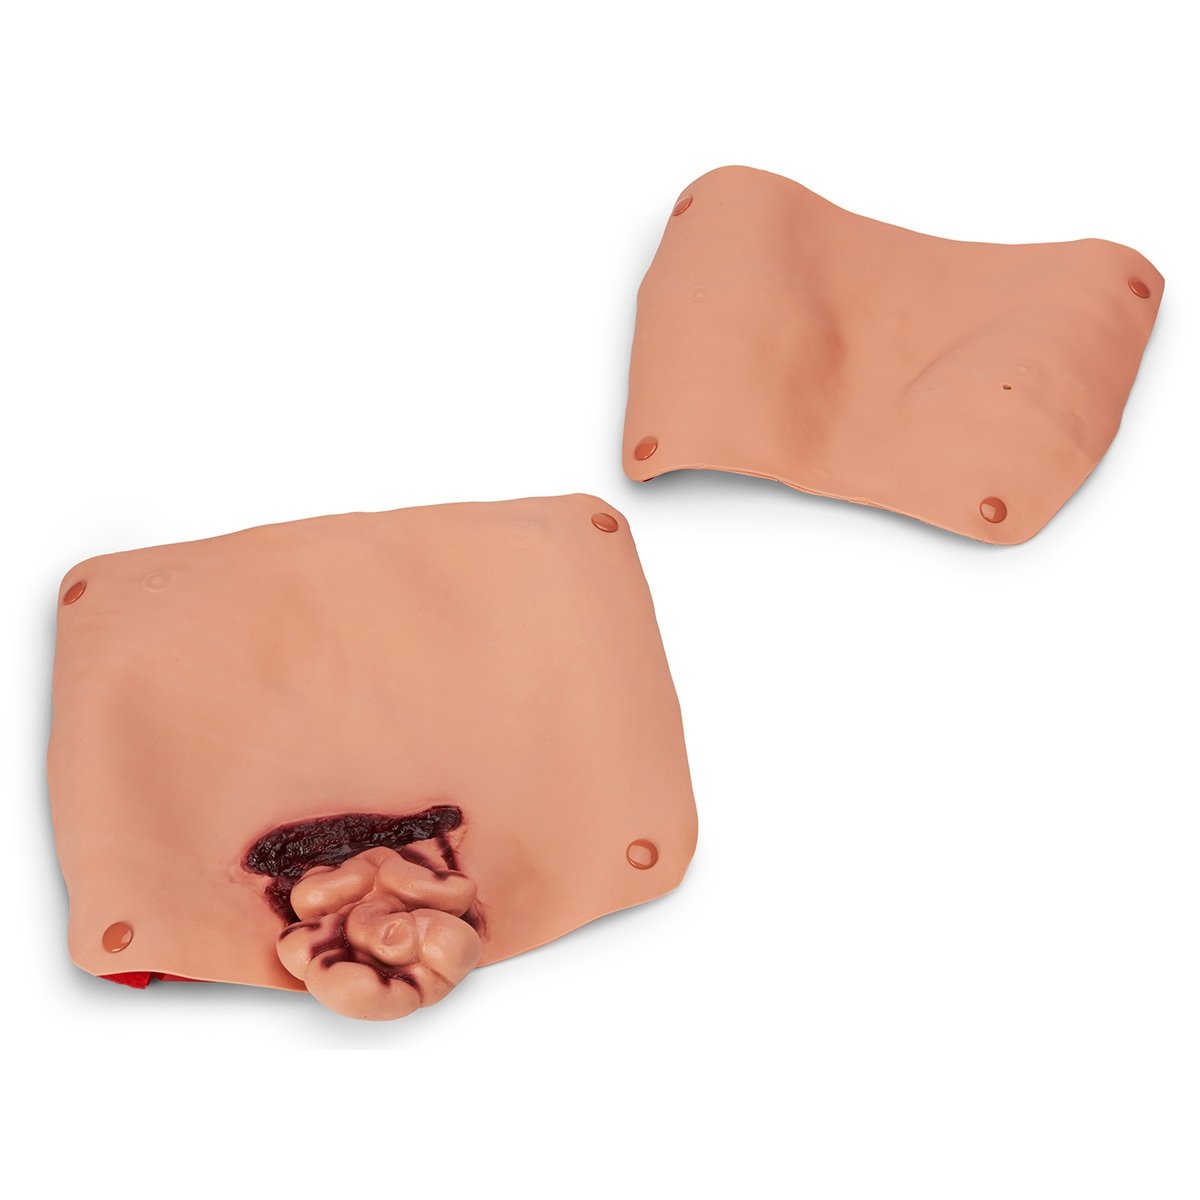 Simulaids EMT Casualty Wound Simulation Kit